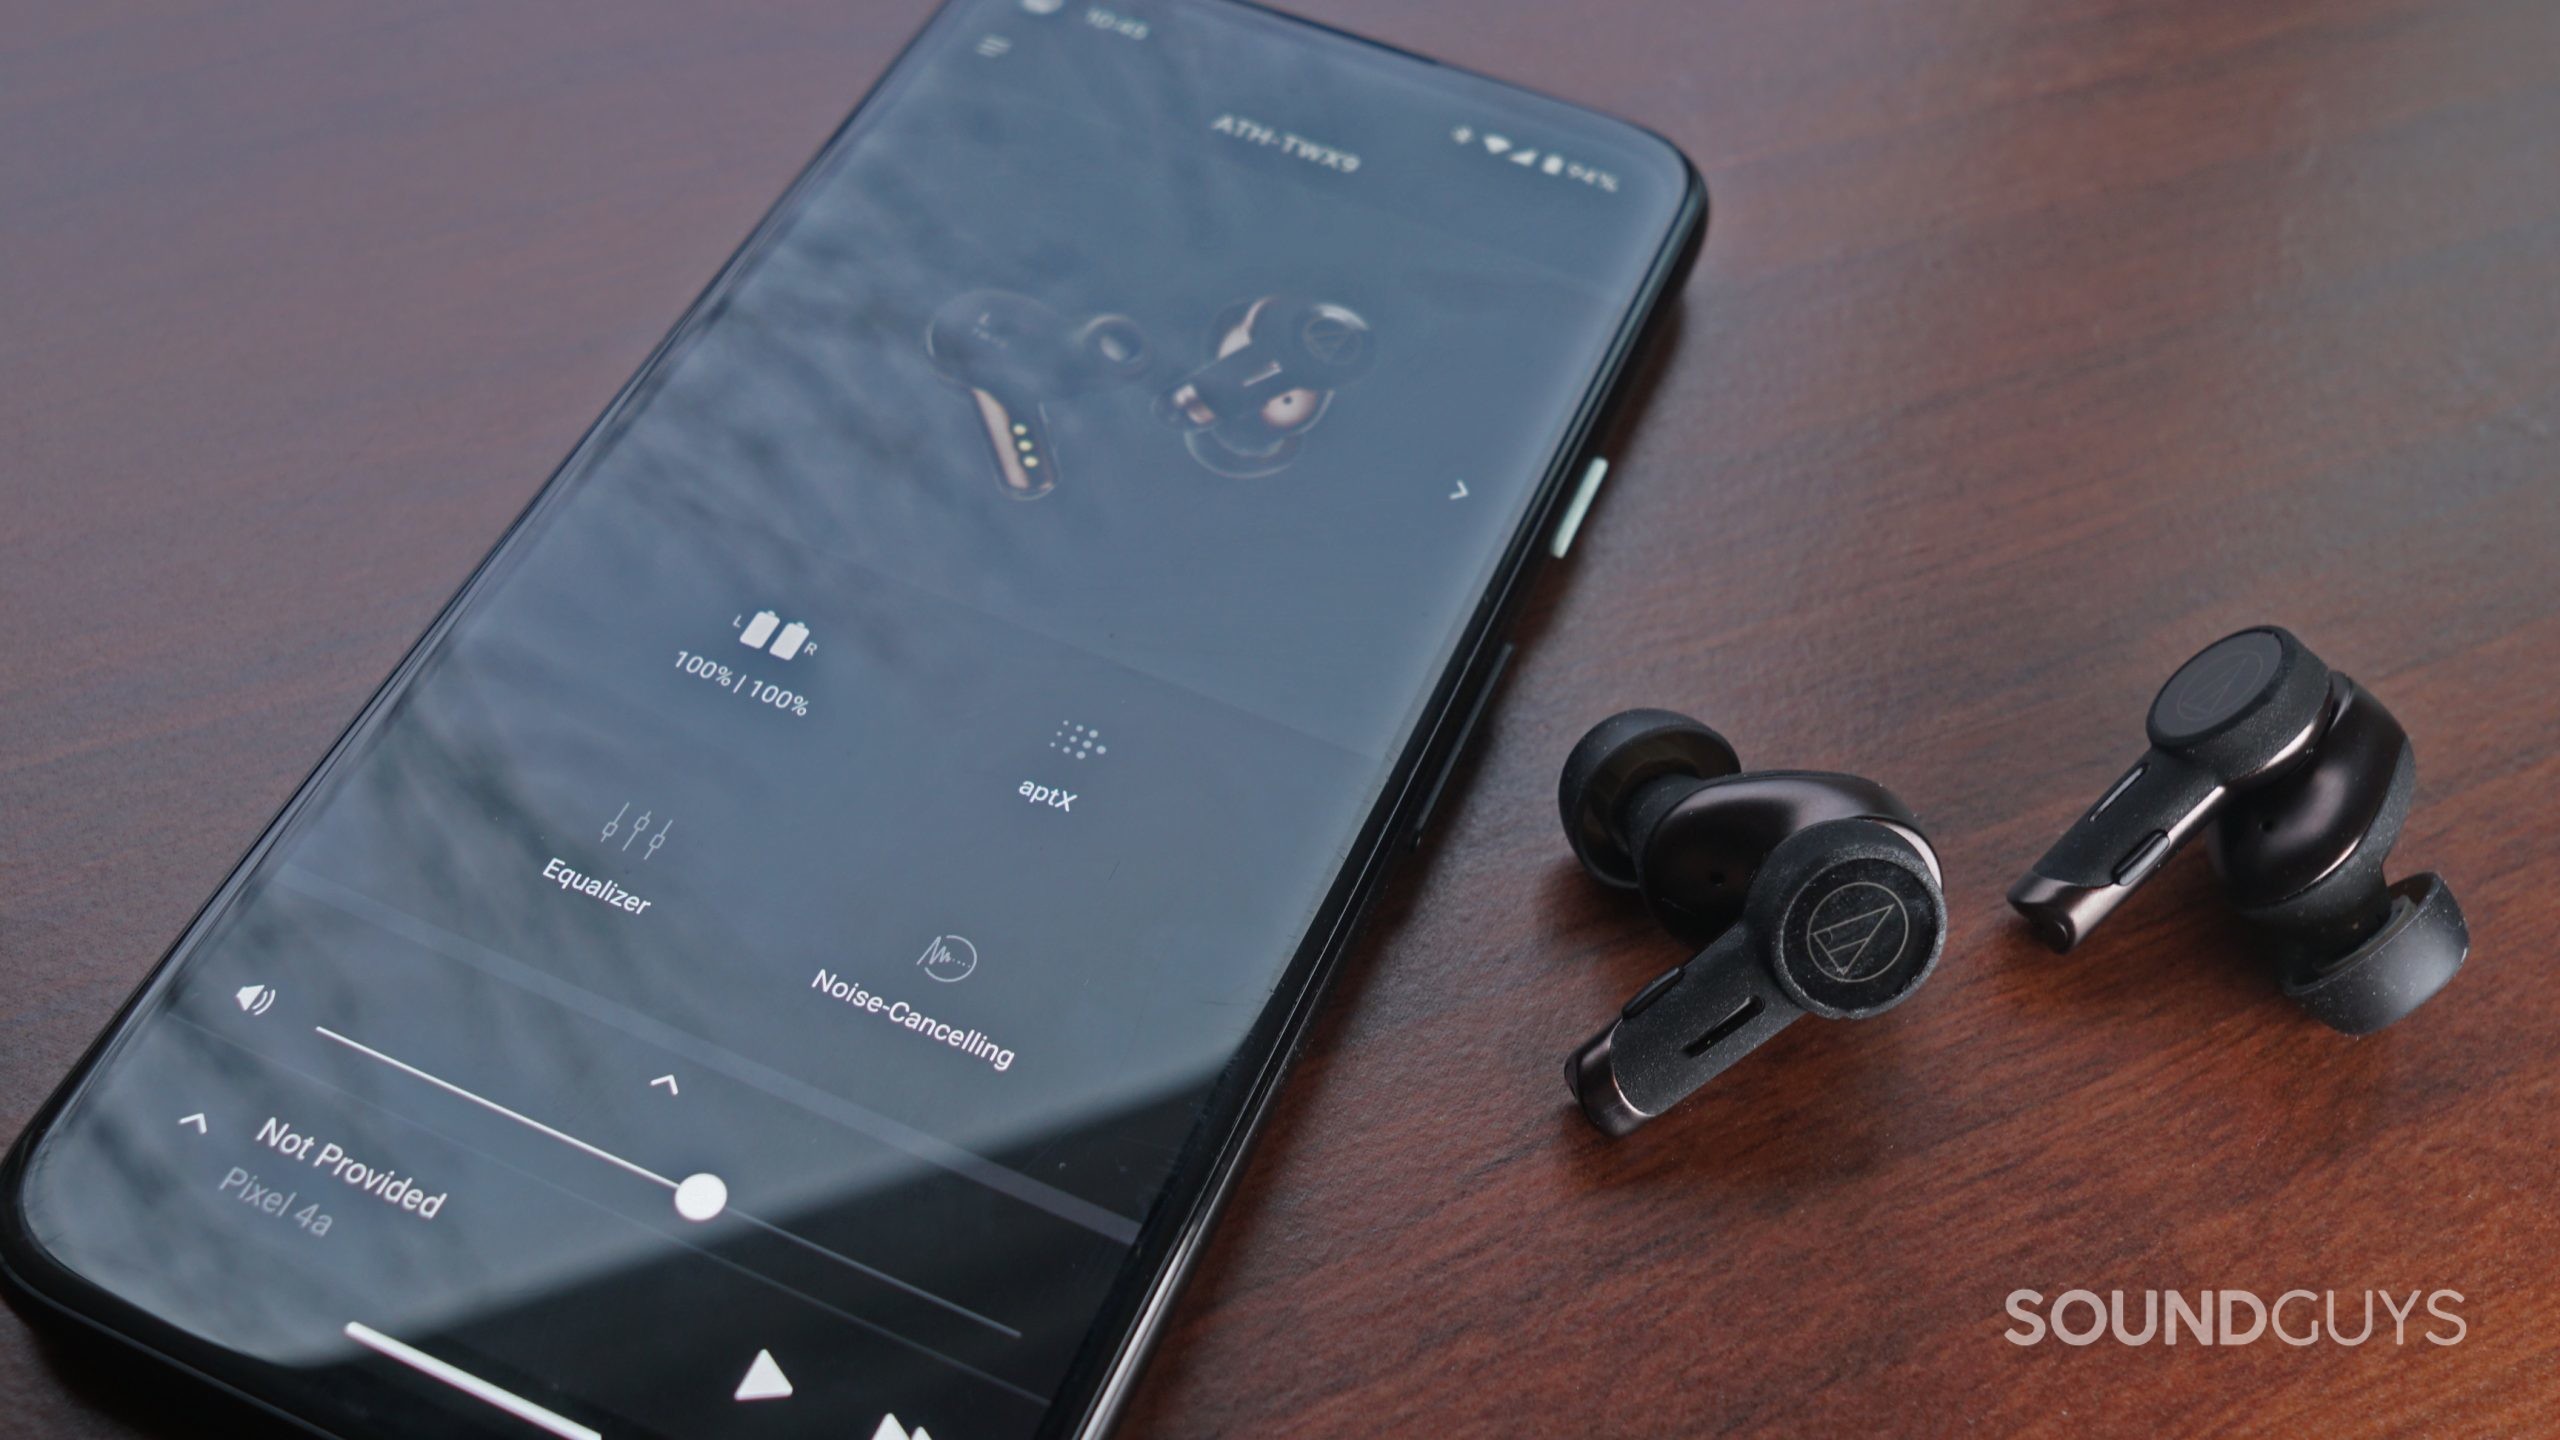 The Audio-Technica ATH-TWX9 earbuds lay on a wooden surface next to a Google Pixel 4a running the Audio-Technica Connect app.